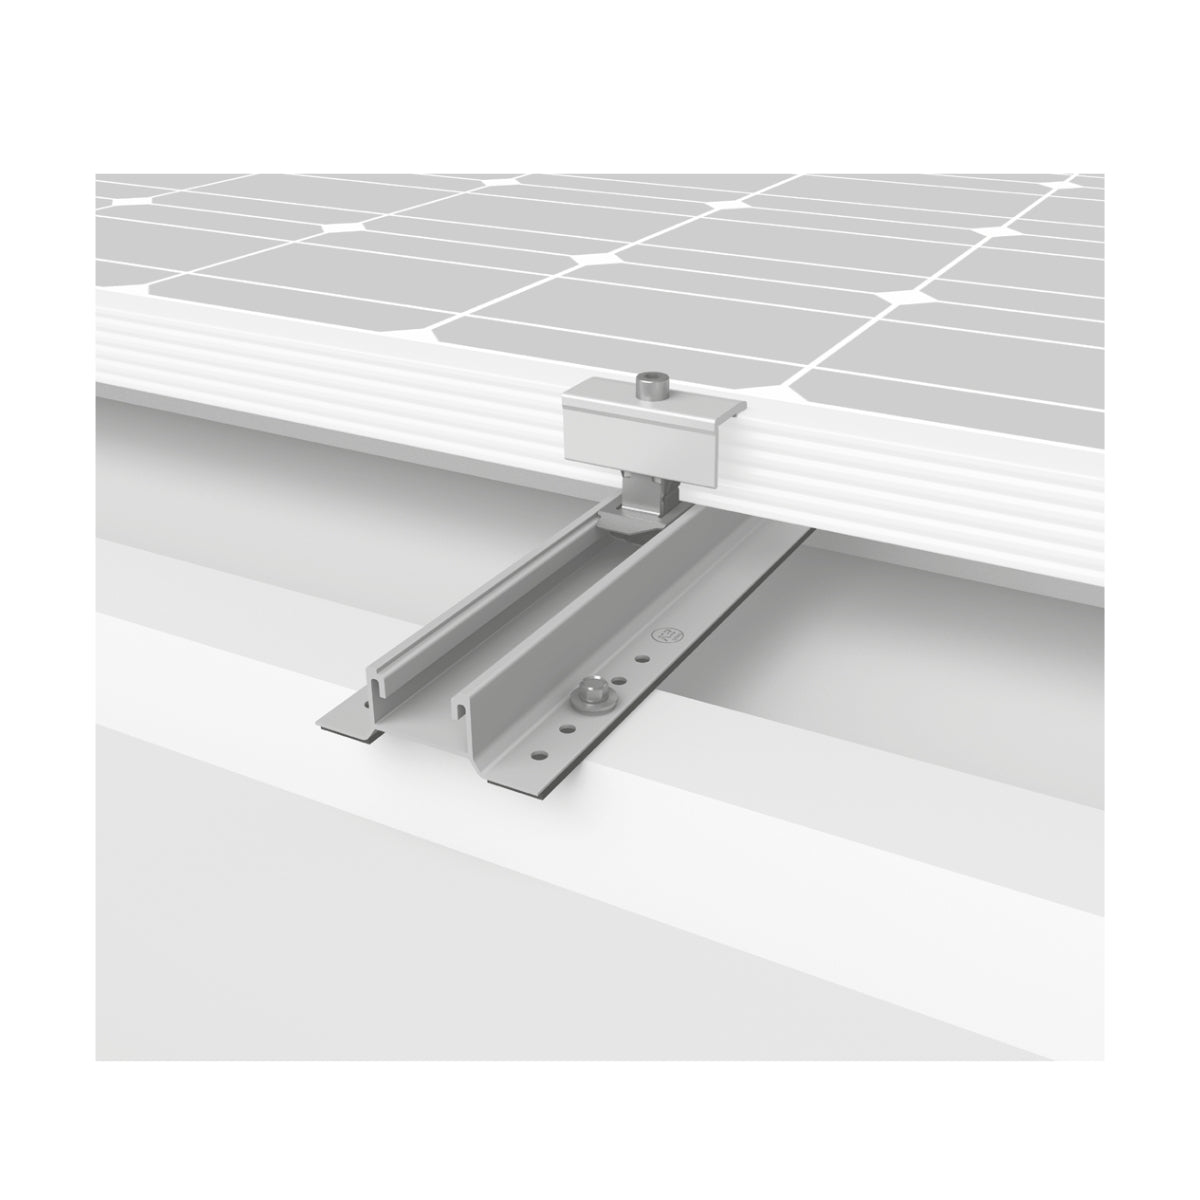 K2-Systems IBR Roof MiniRail MK2 4 Panel Roof Mounting System